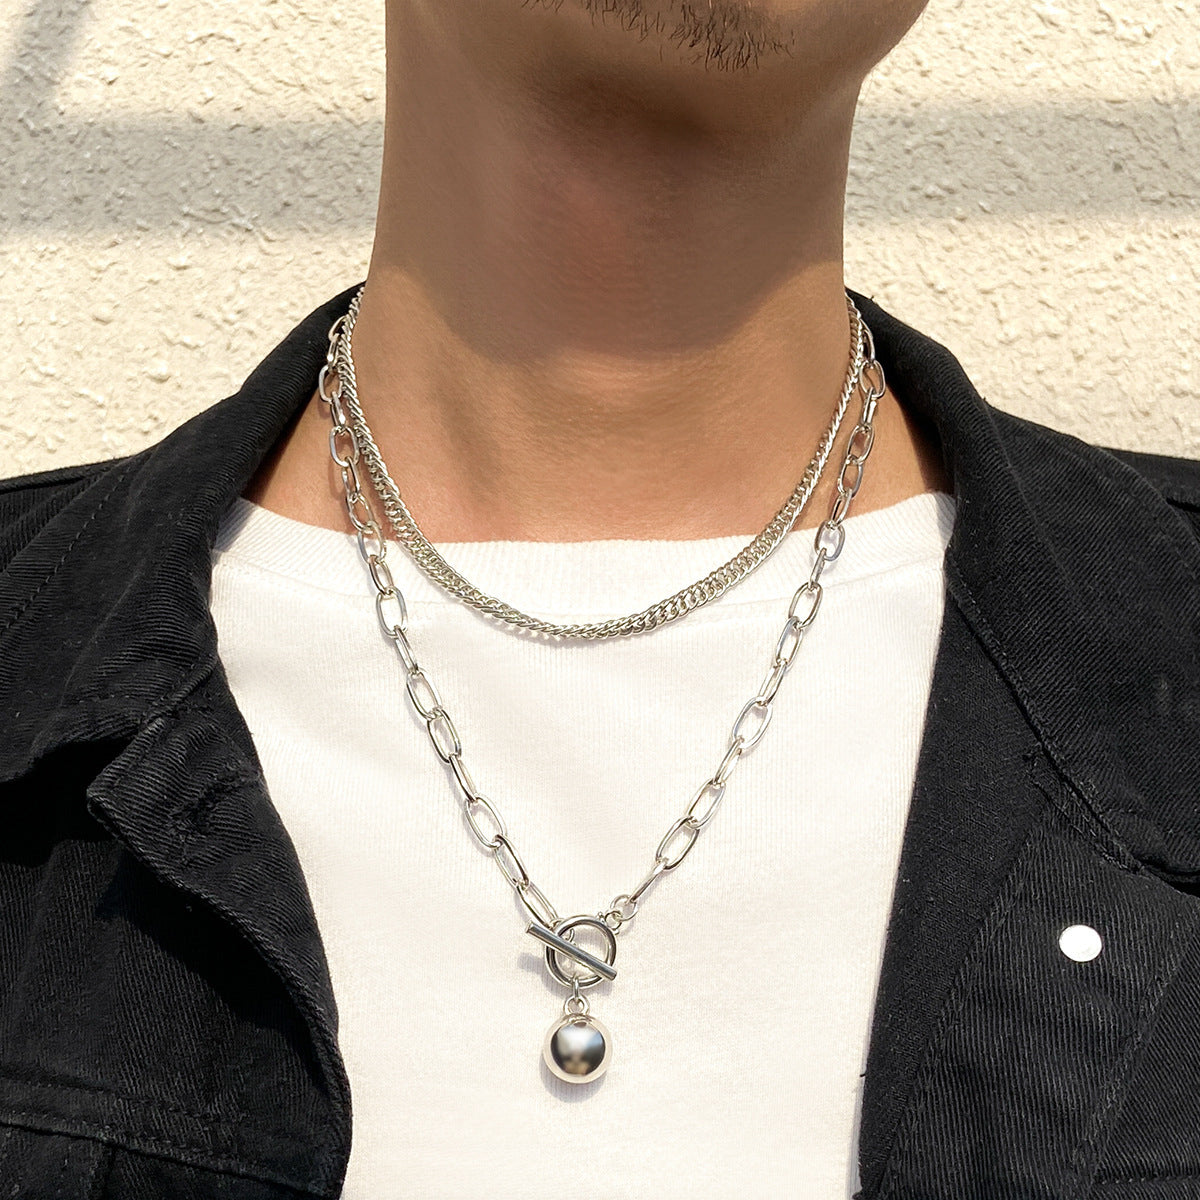 Men Fashionable personalized ball design double stacked versatile necklace